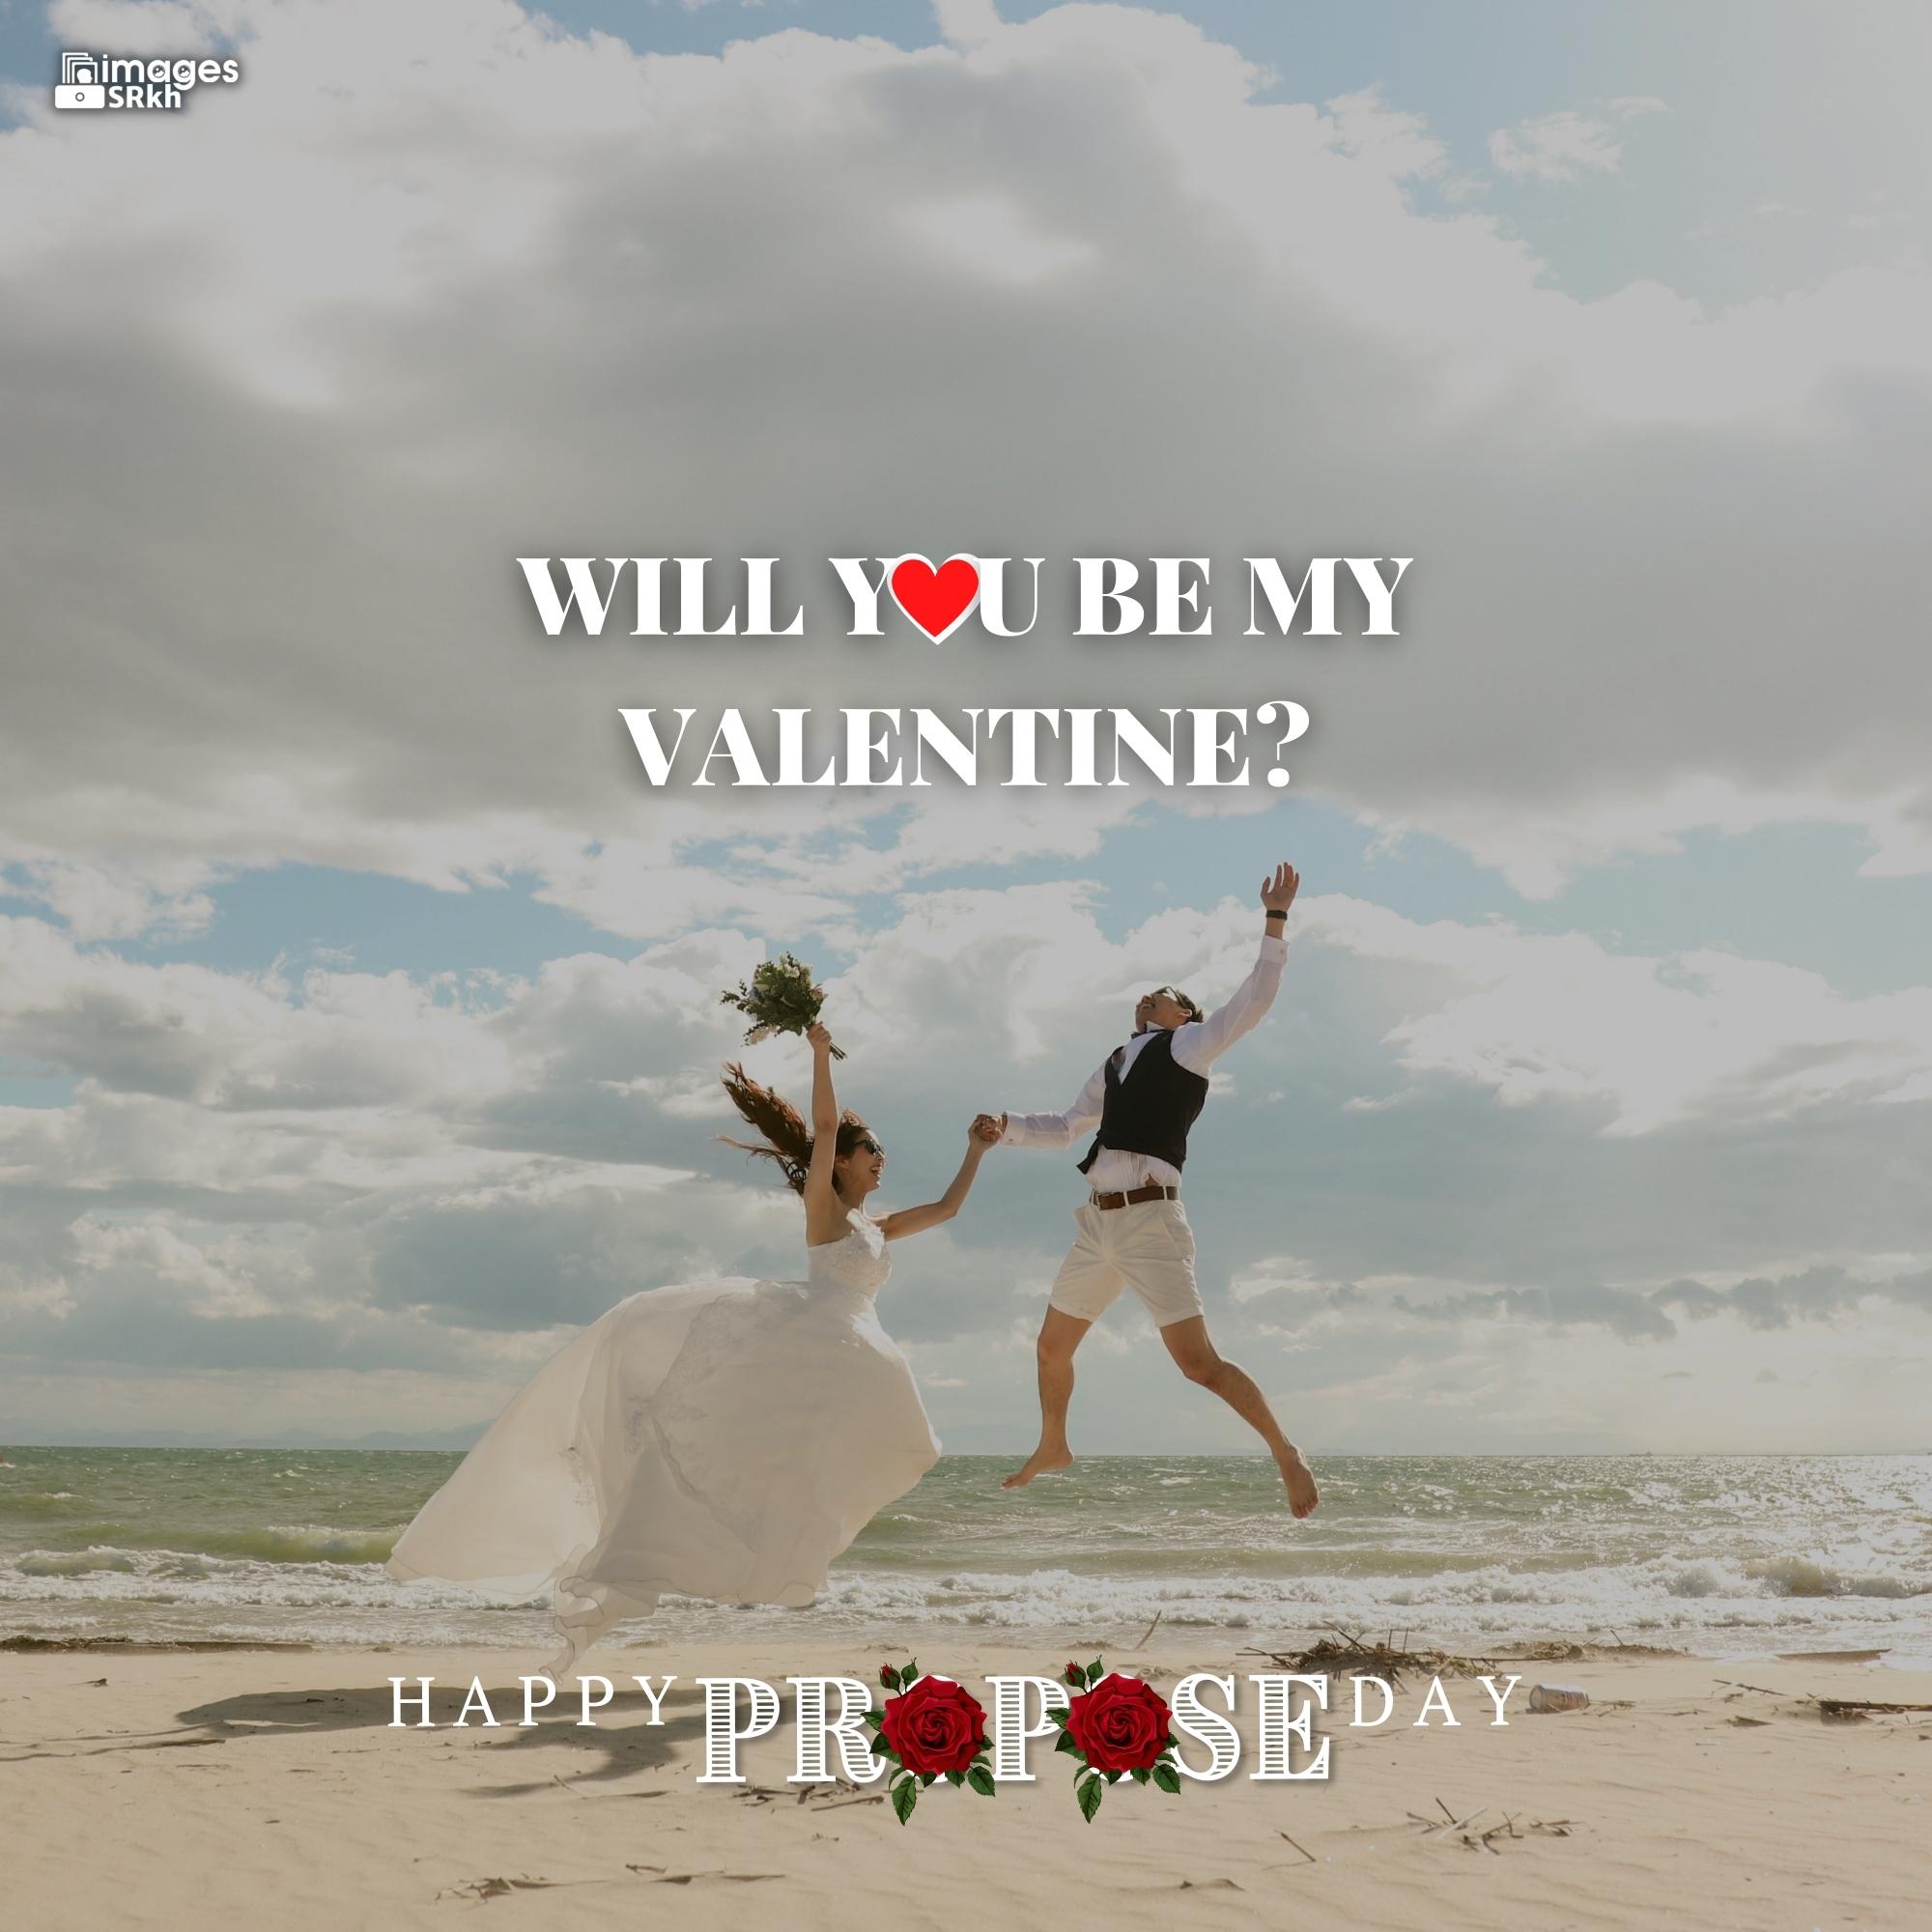 Propose Day Images | 236 | Will You Be My Valentine